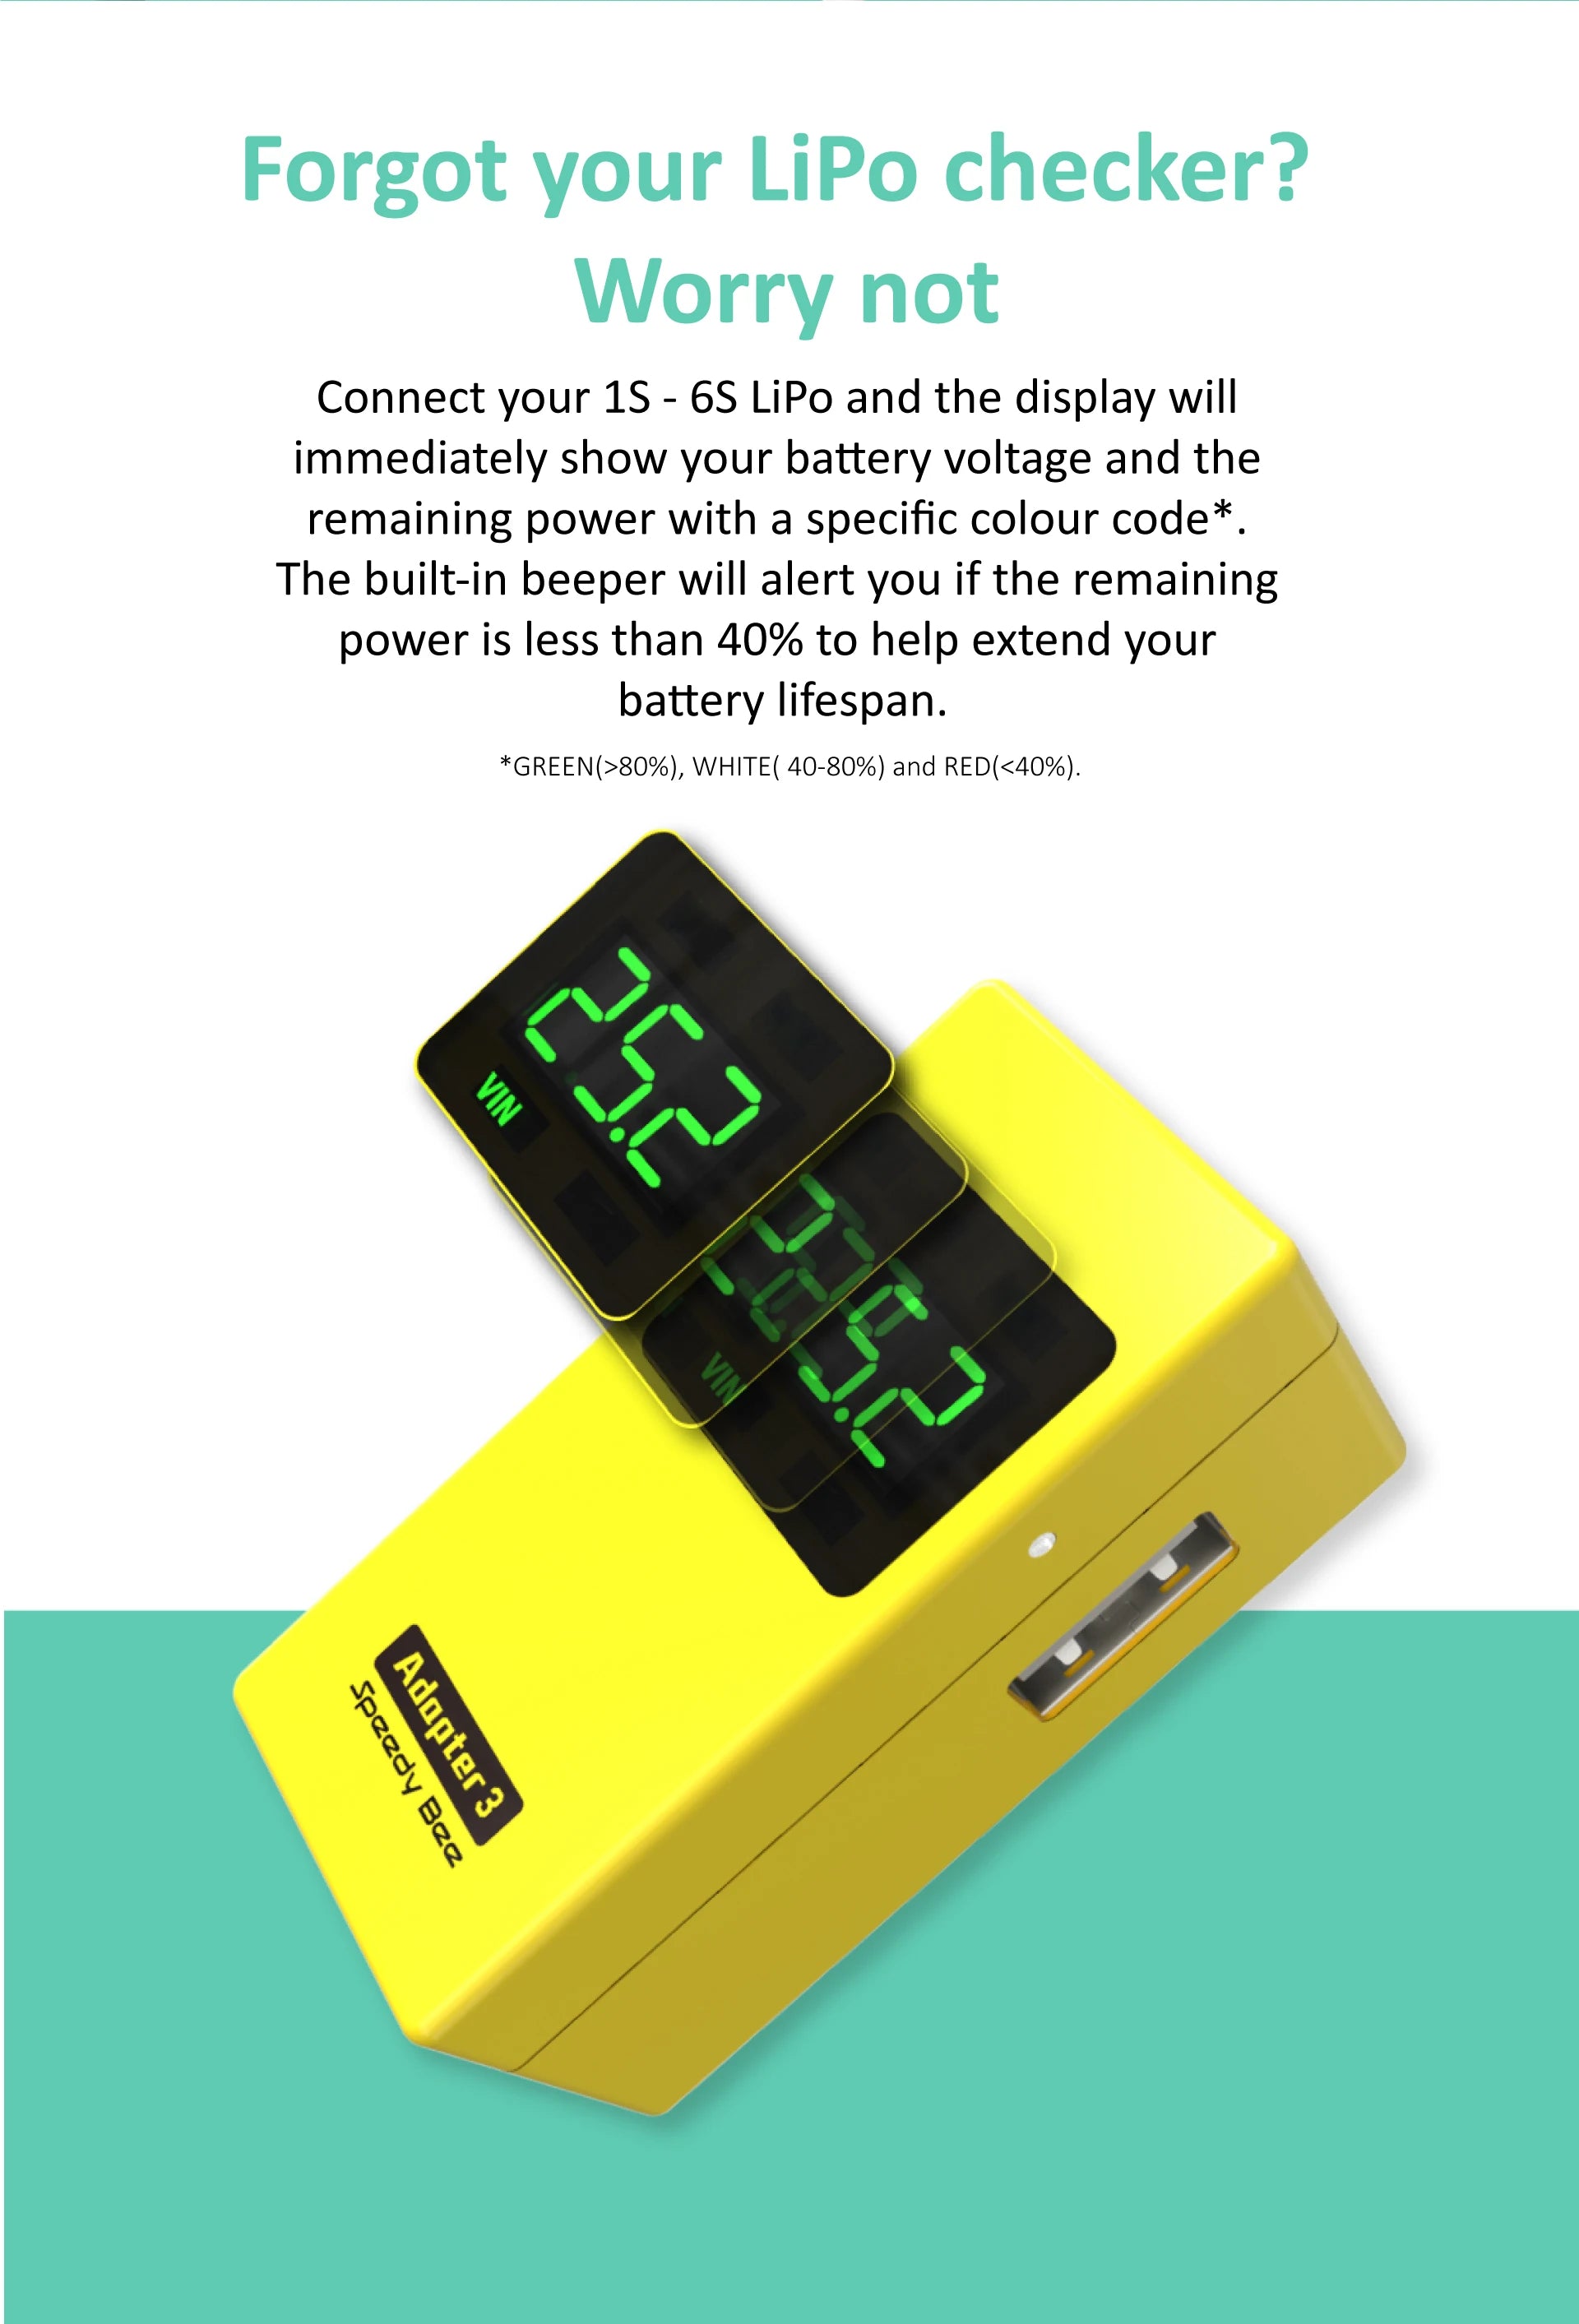 SpeedyBee Adapter, built-in beeper will alert you if the remaining power is less than 40% to